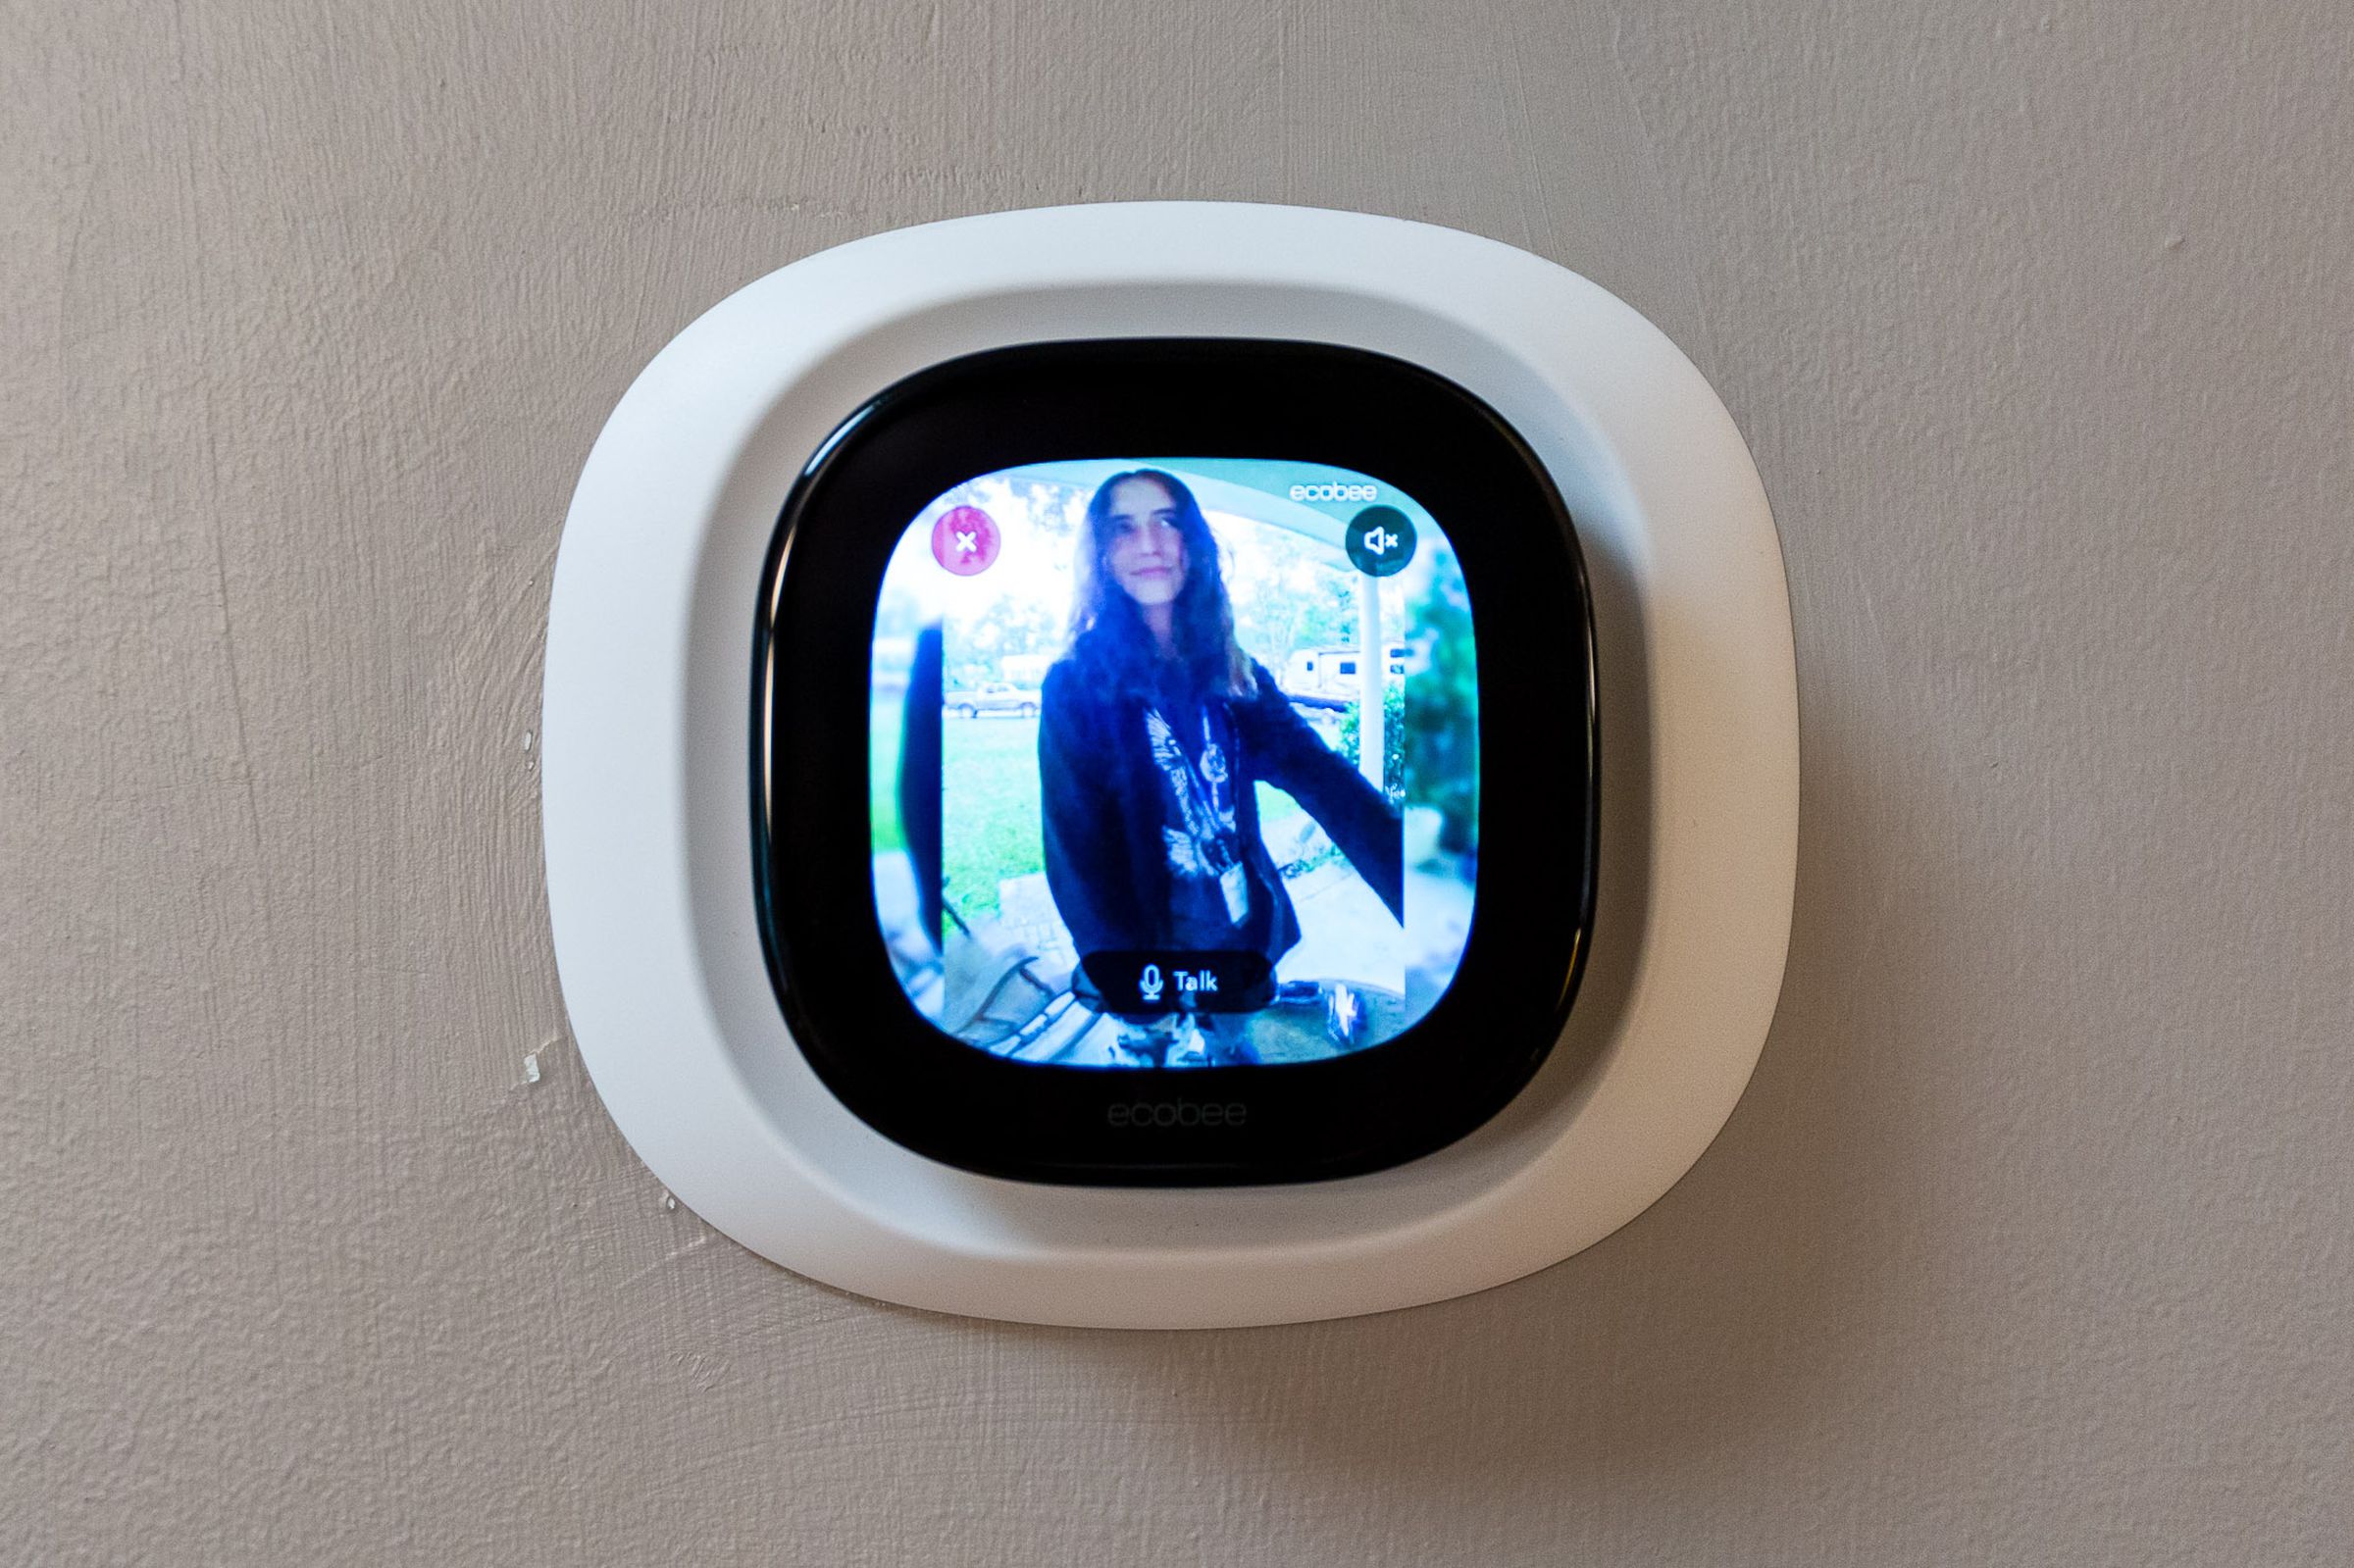 <em>The Smart Thermostat Premium showing a live feed of the doorbell camera.</em>